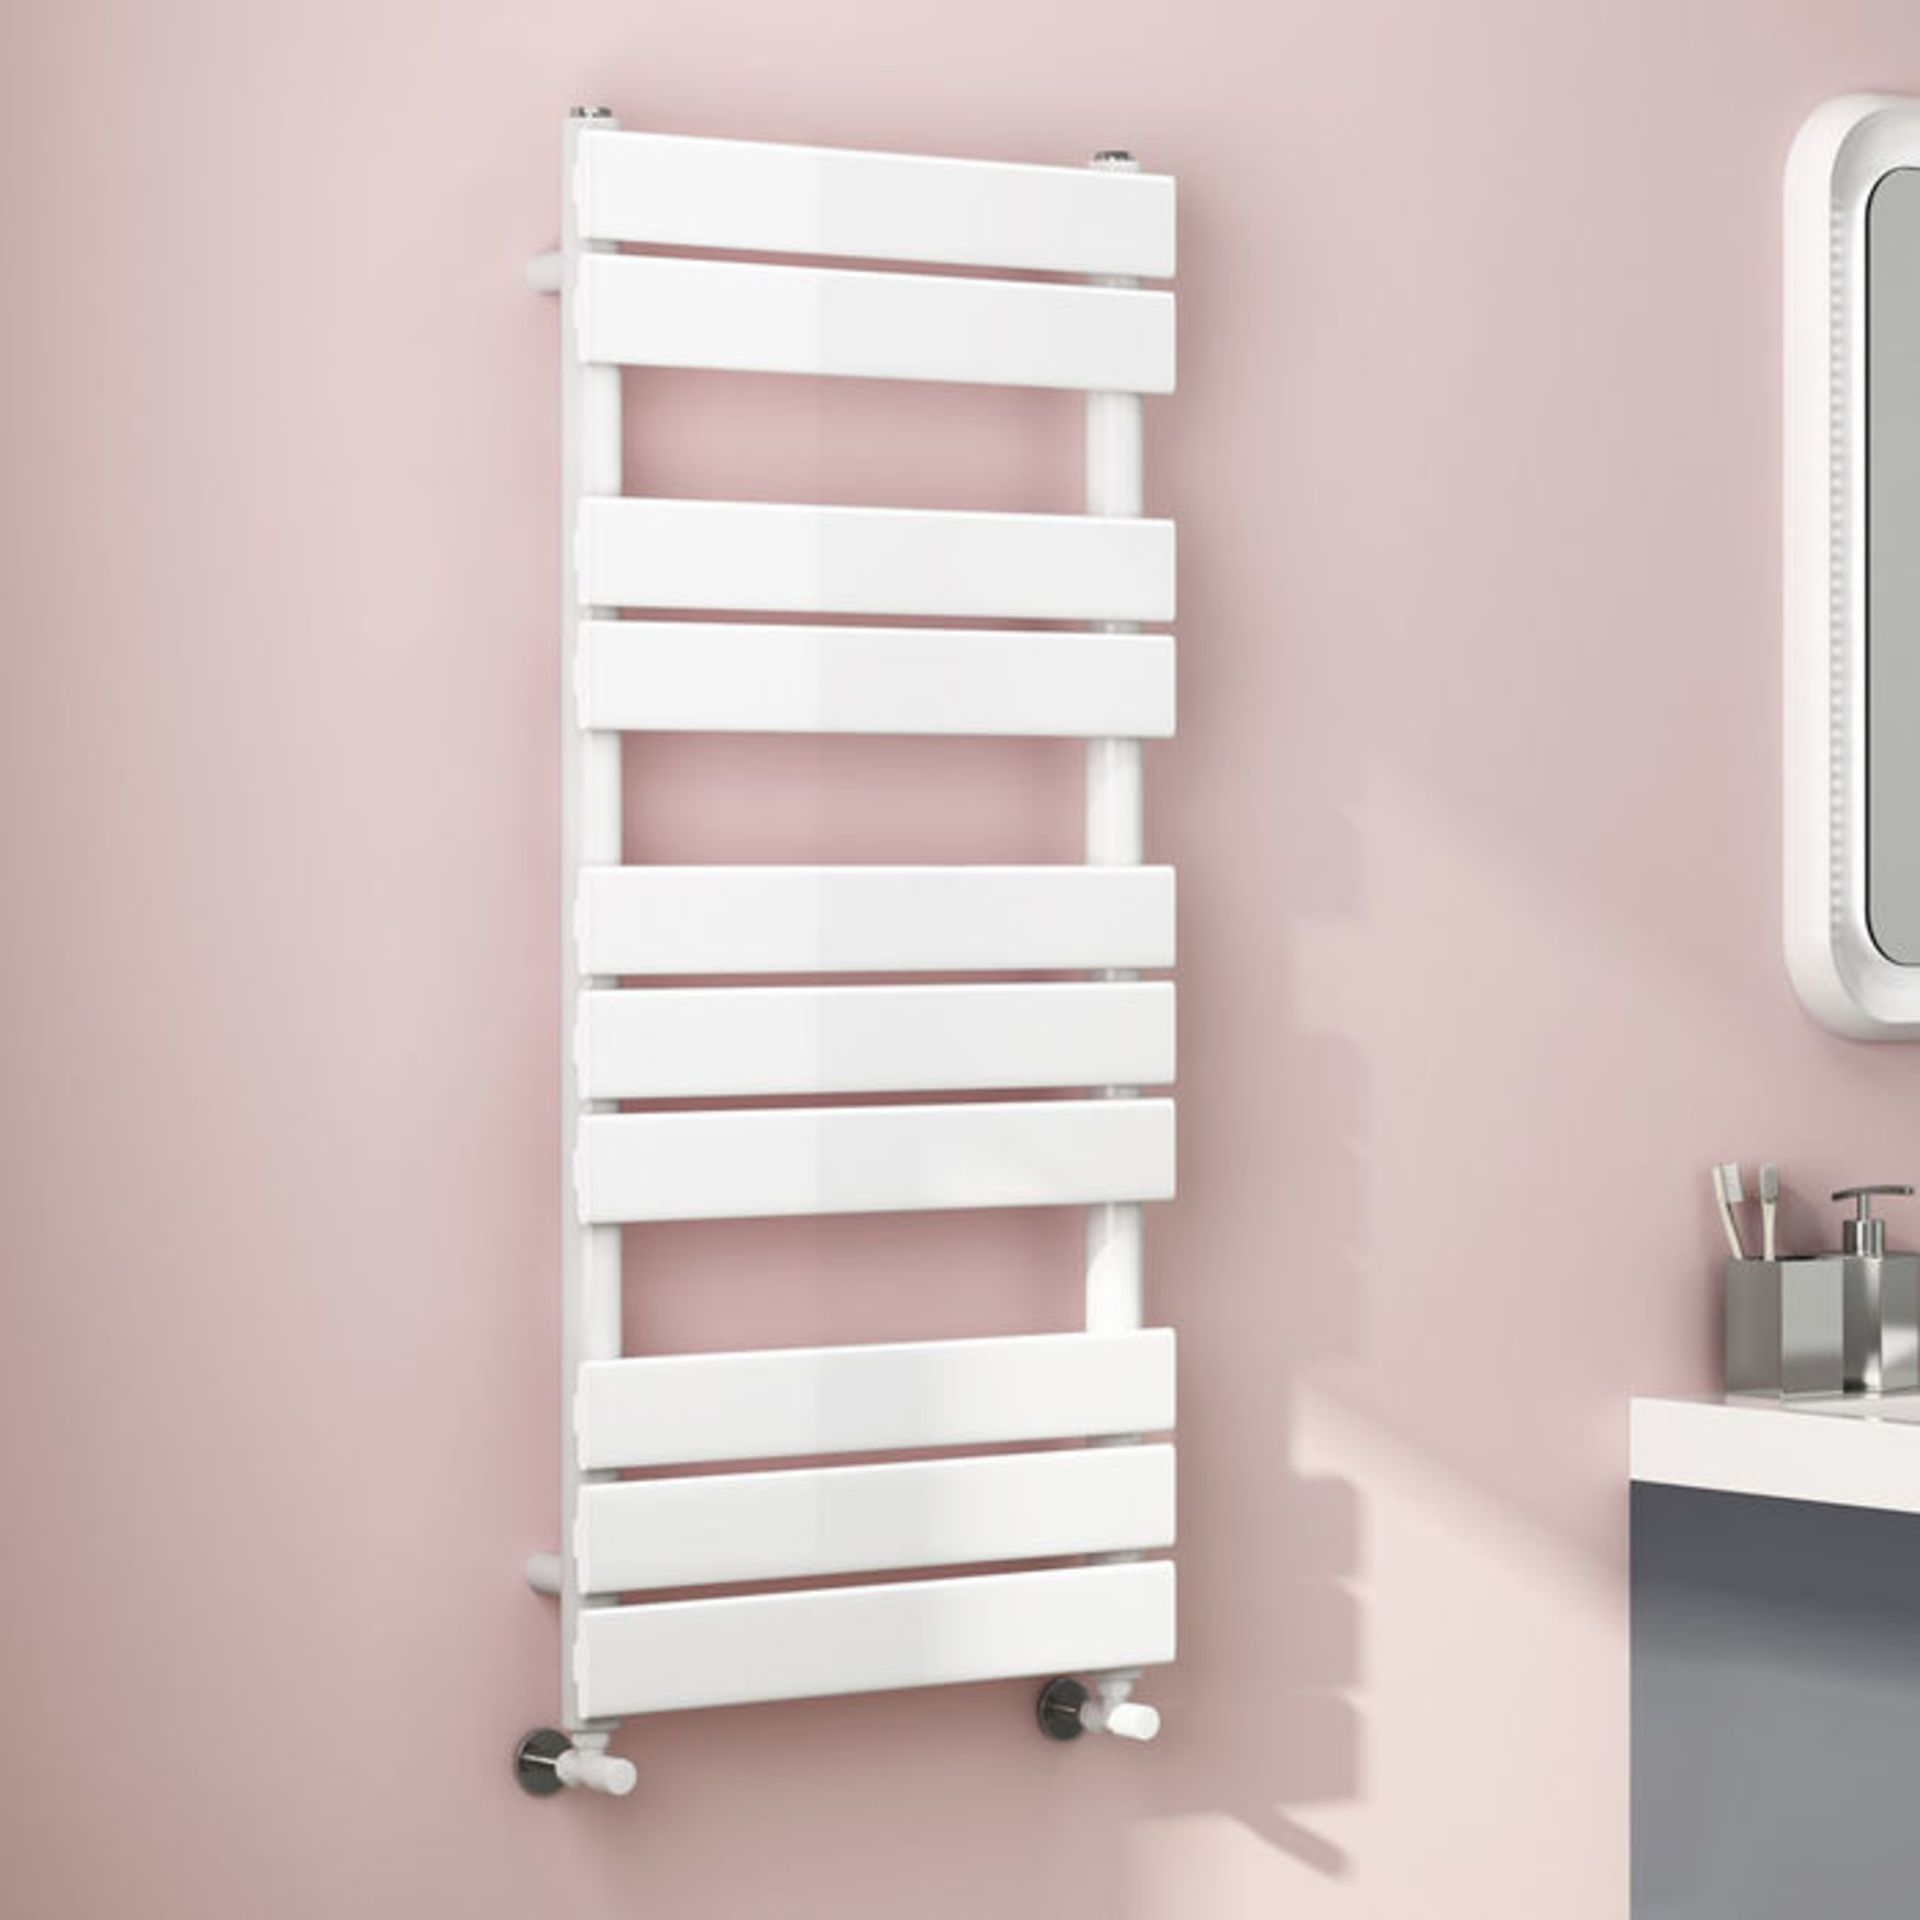 (ZA191) 1000x450mm White Flat Panel Ladder Towel Radiator. Made from low carbon steel with a high